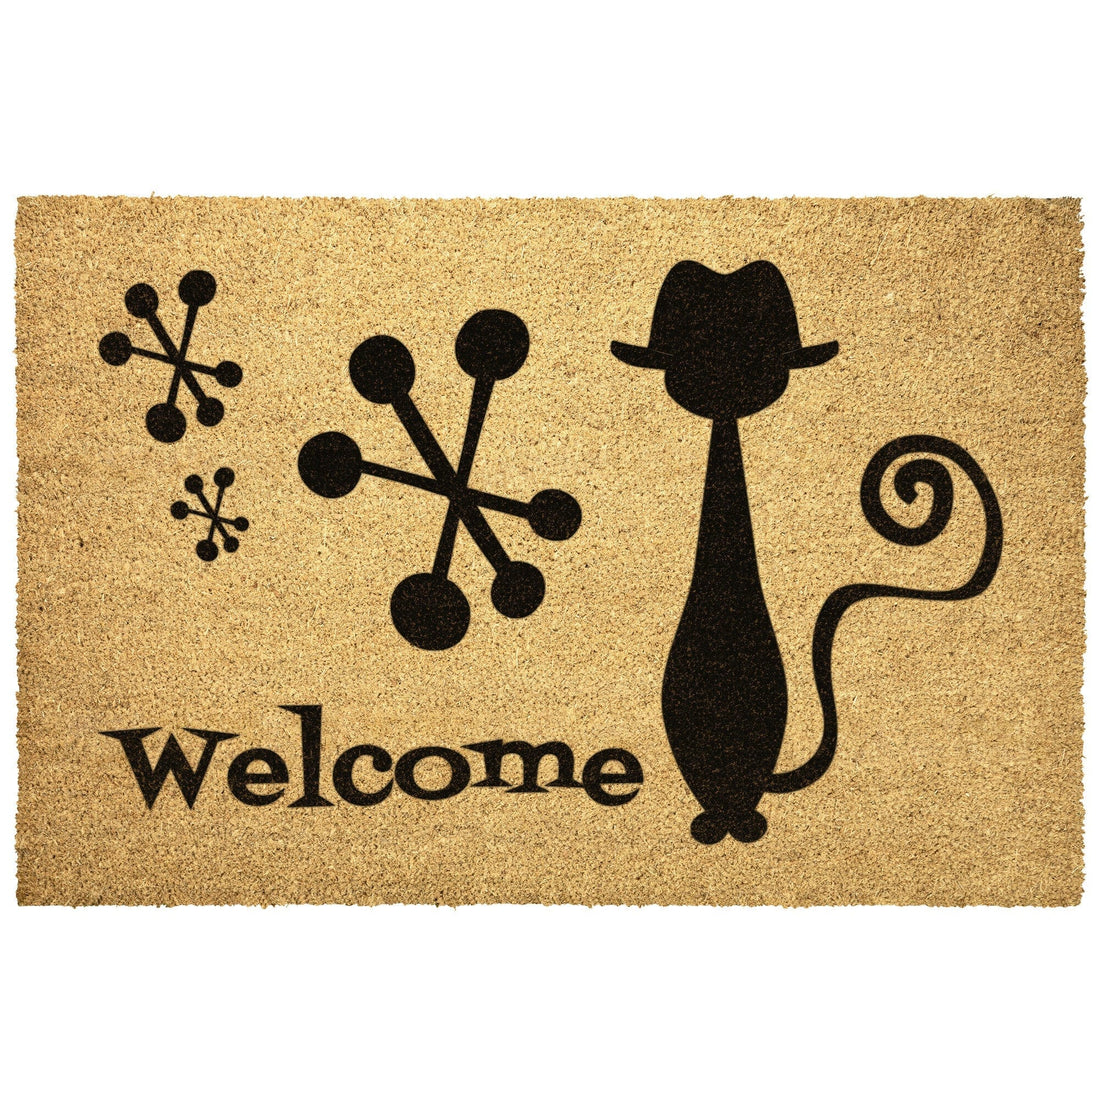 https://cdn.shopify.com/s/files/1/0521/9309/9931/products/atomic-living-welcome-mat-atomic-hipster-cat-mid-century-modern-outdoor-entry-mat-34189156843675.jpg?v=1669344654&width=1100